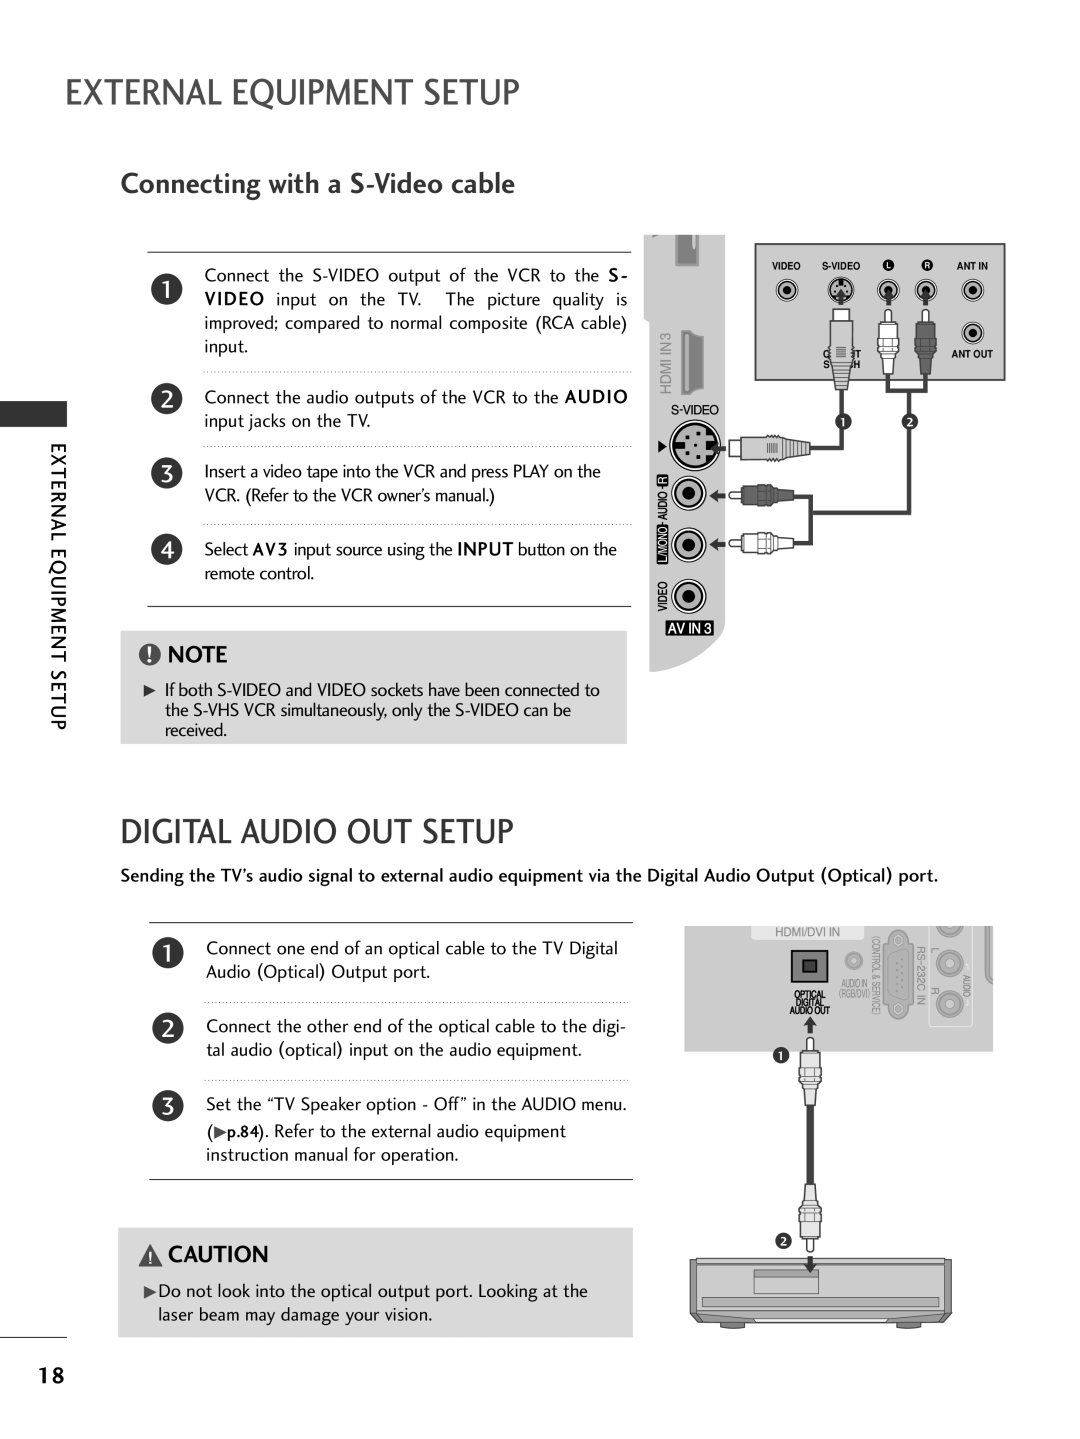 LG Electronics 50PG69, 42PG69 owner manual Digital Audio OUT Setup, Connecting with a S-Video cable 